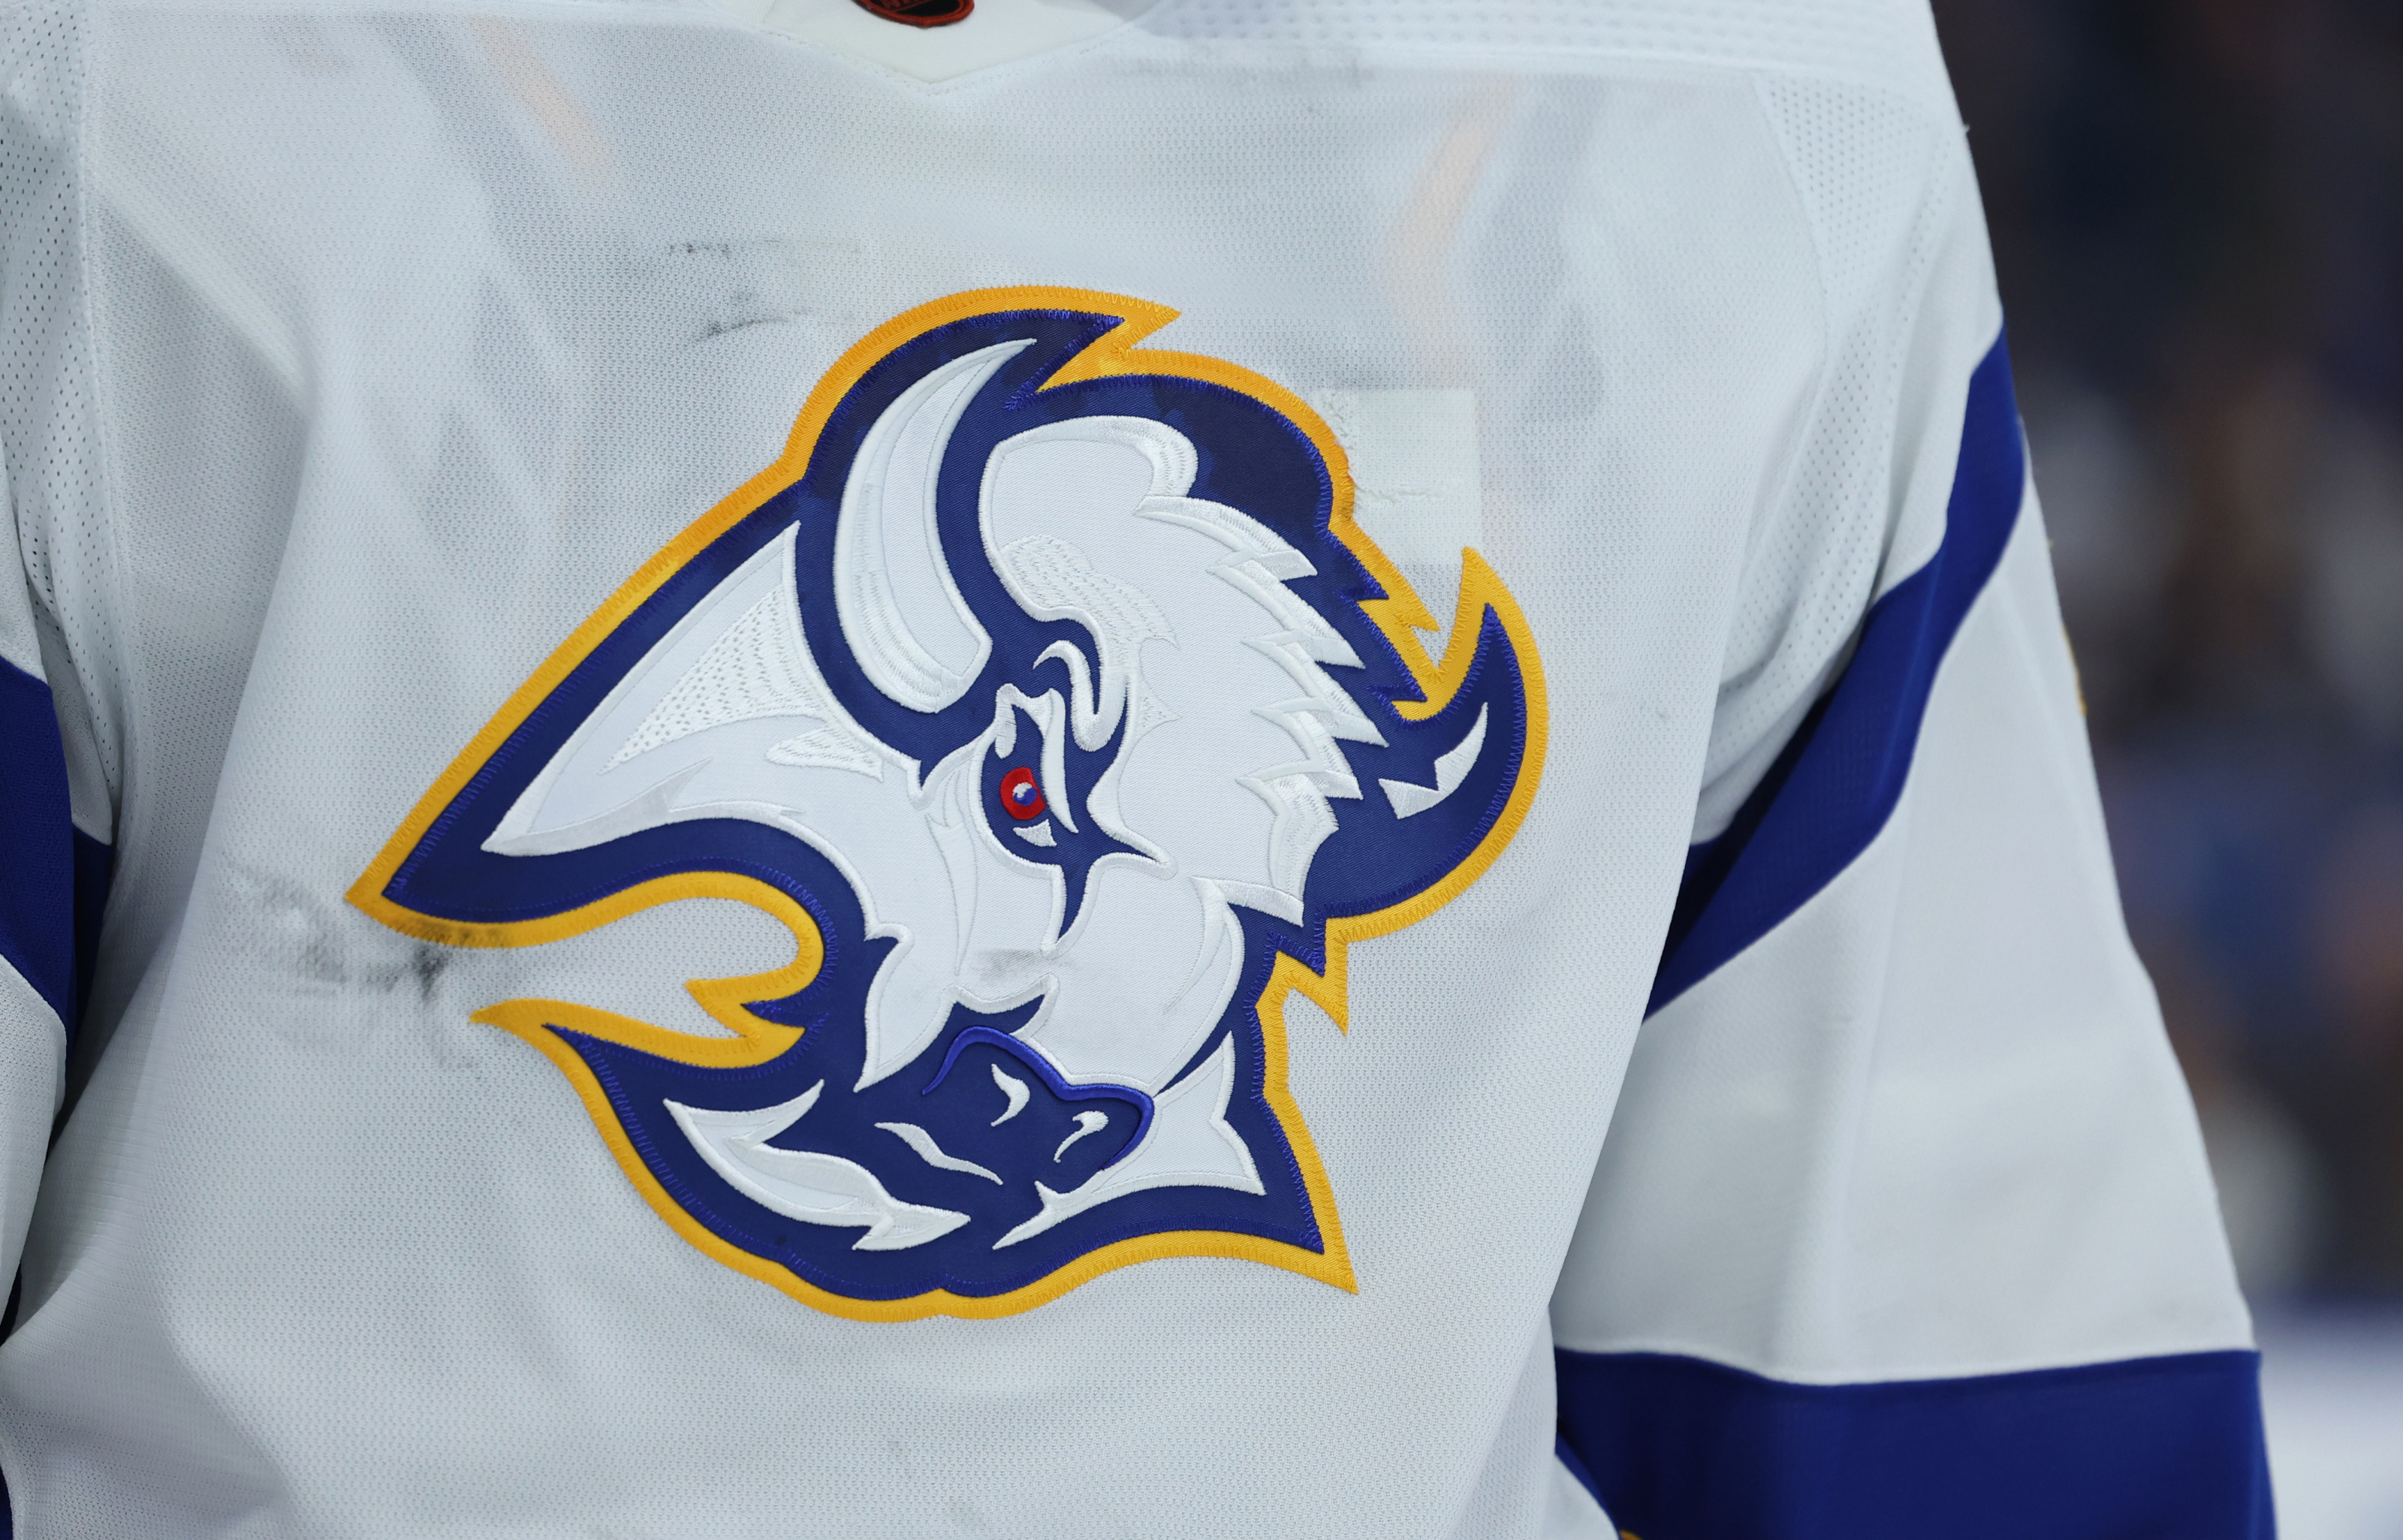 Sabres to bring back 'Goathead' jerseys with updated logo in 2022-23 